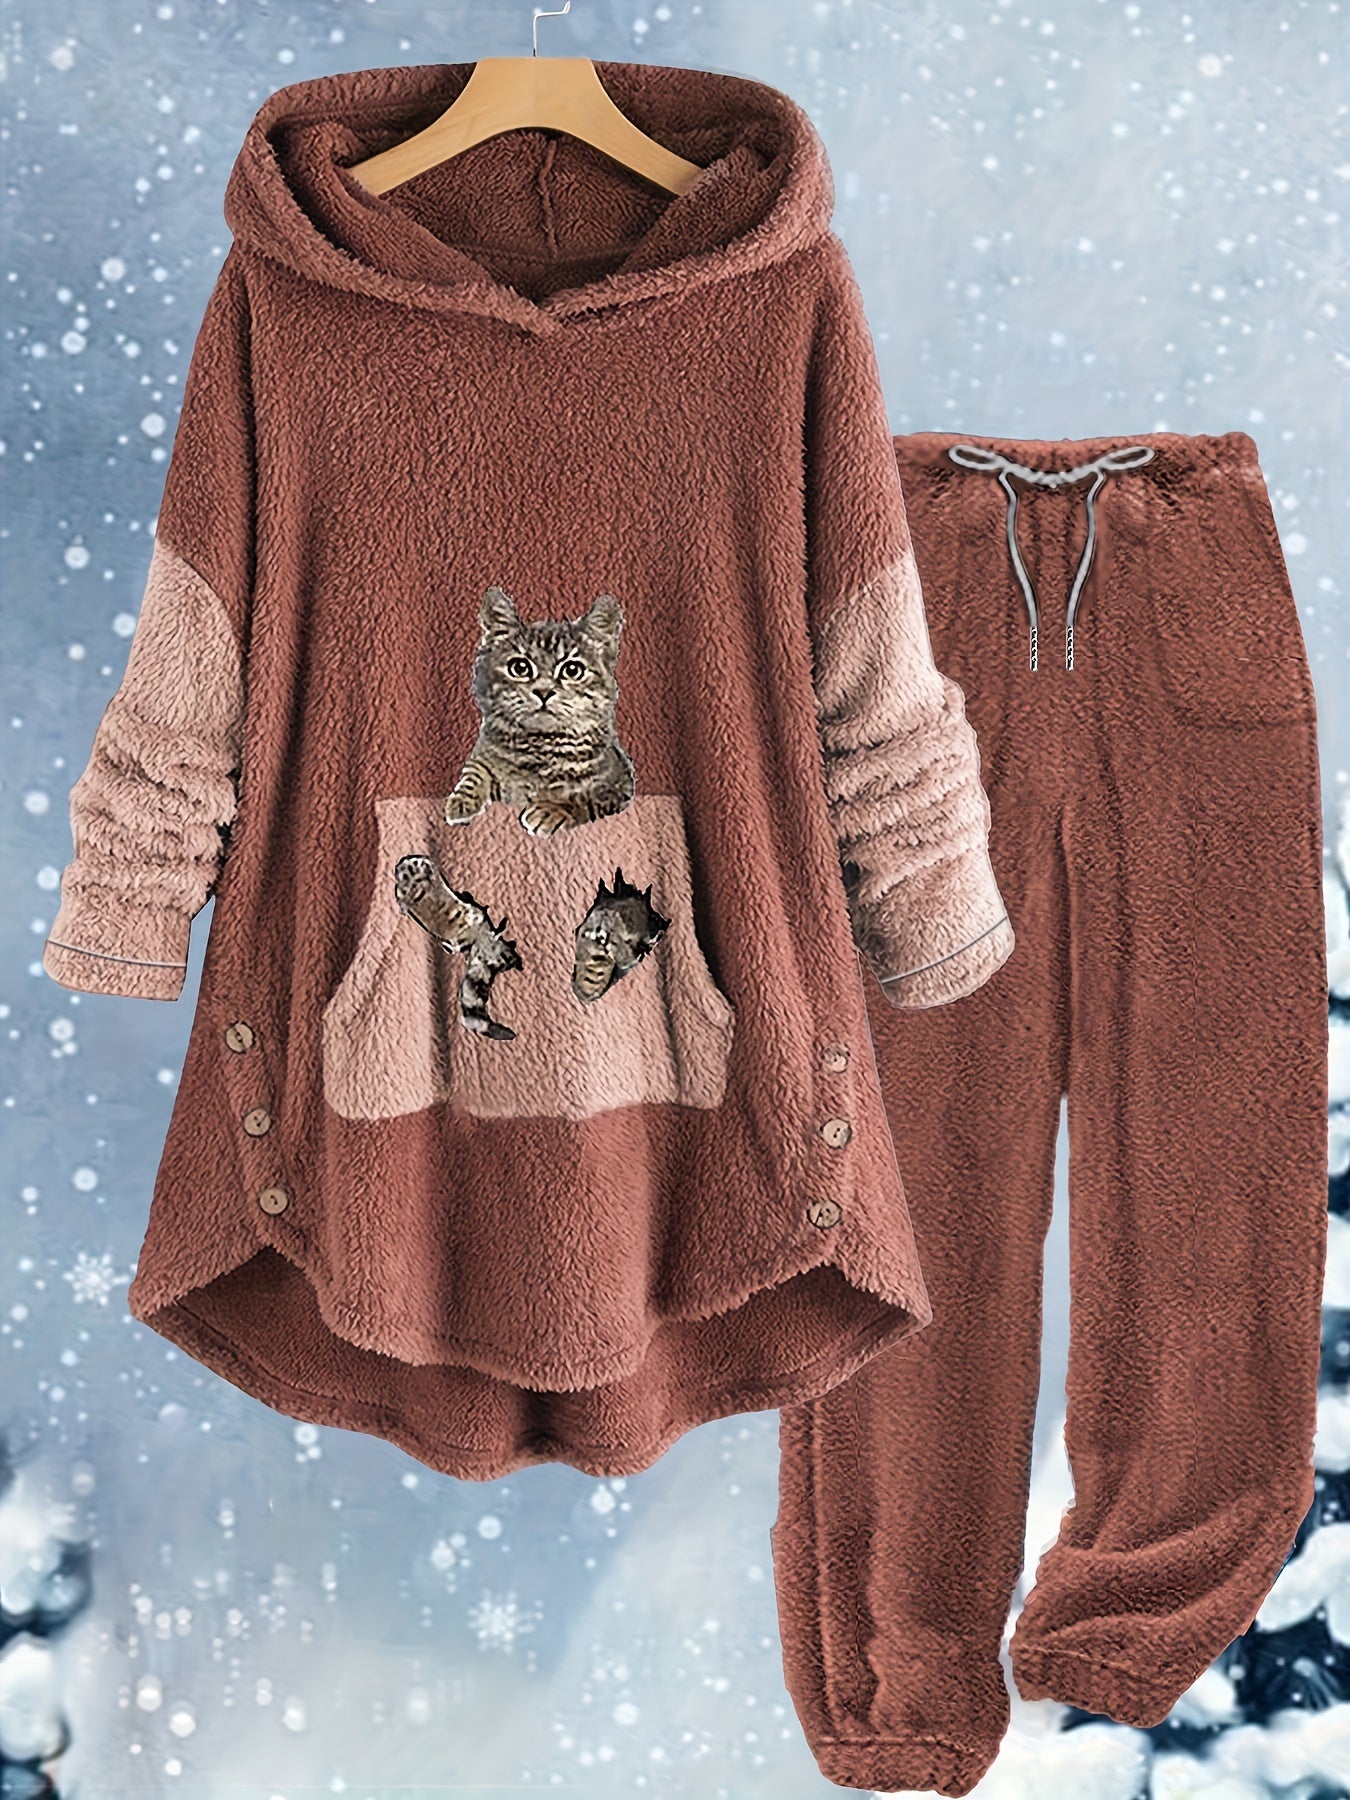 A cozy, brown pajama set with a fuzzy texture, featuring a hooded top with a cartoon cat design on the front pocket and matching pants with a drawstring waist, displayed against a snowy background. Made from soft polyester for ultimate comfort. Introducing the Maramalive™ Plus Size Casual Outfits Two Piece Set, Women's Plus Cat Print Fleece Long Sleeve Button Decor Hoodie & Pants Outfits 2 Piece Set.